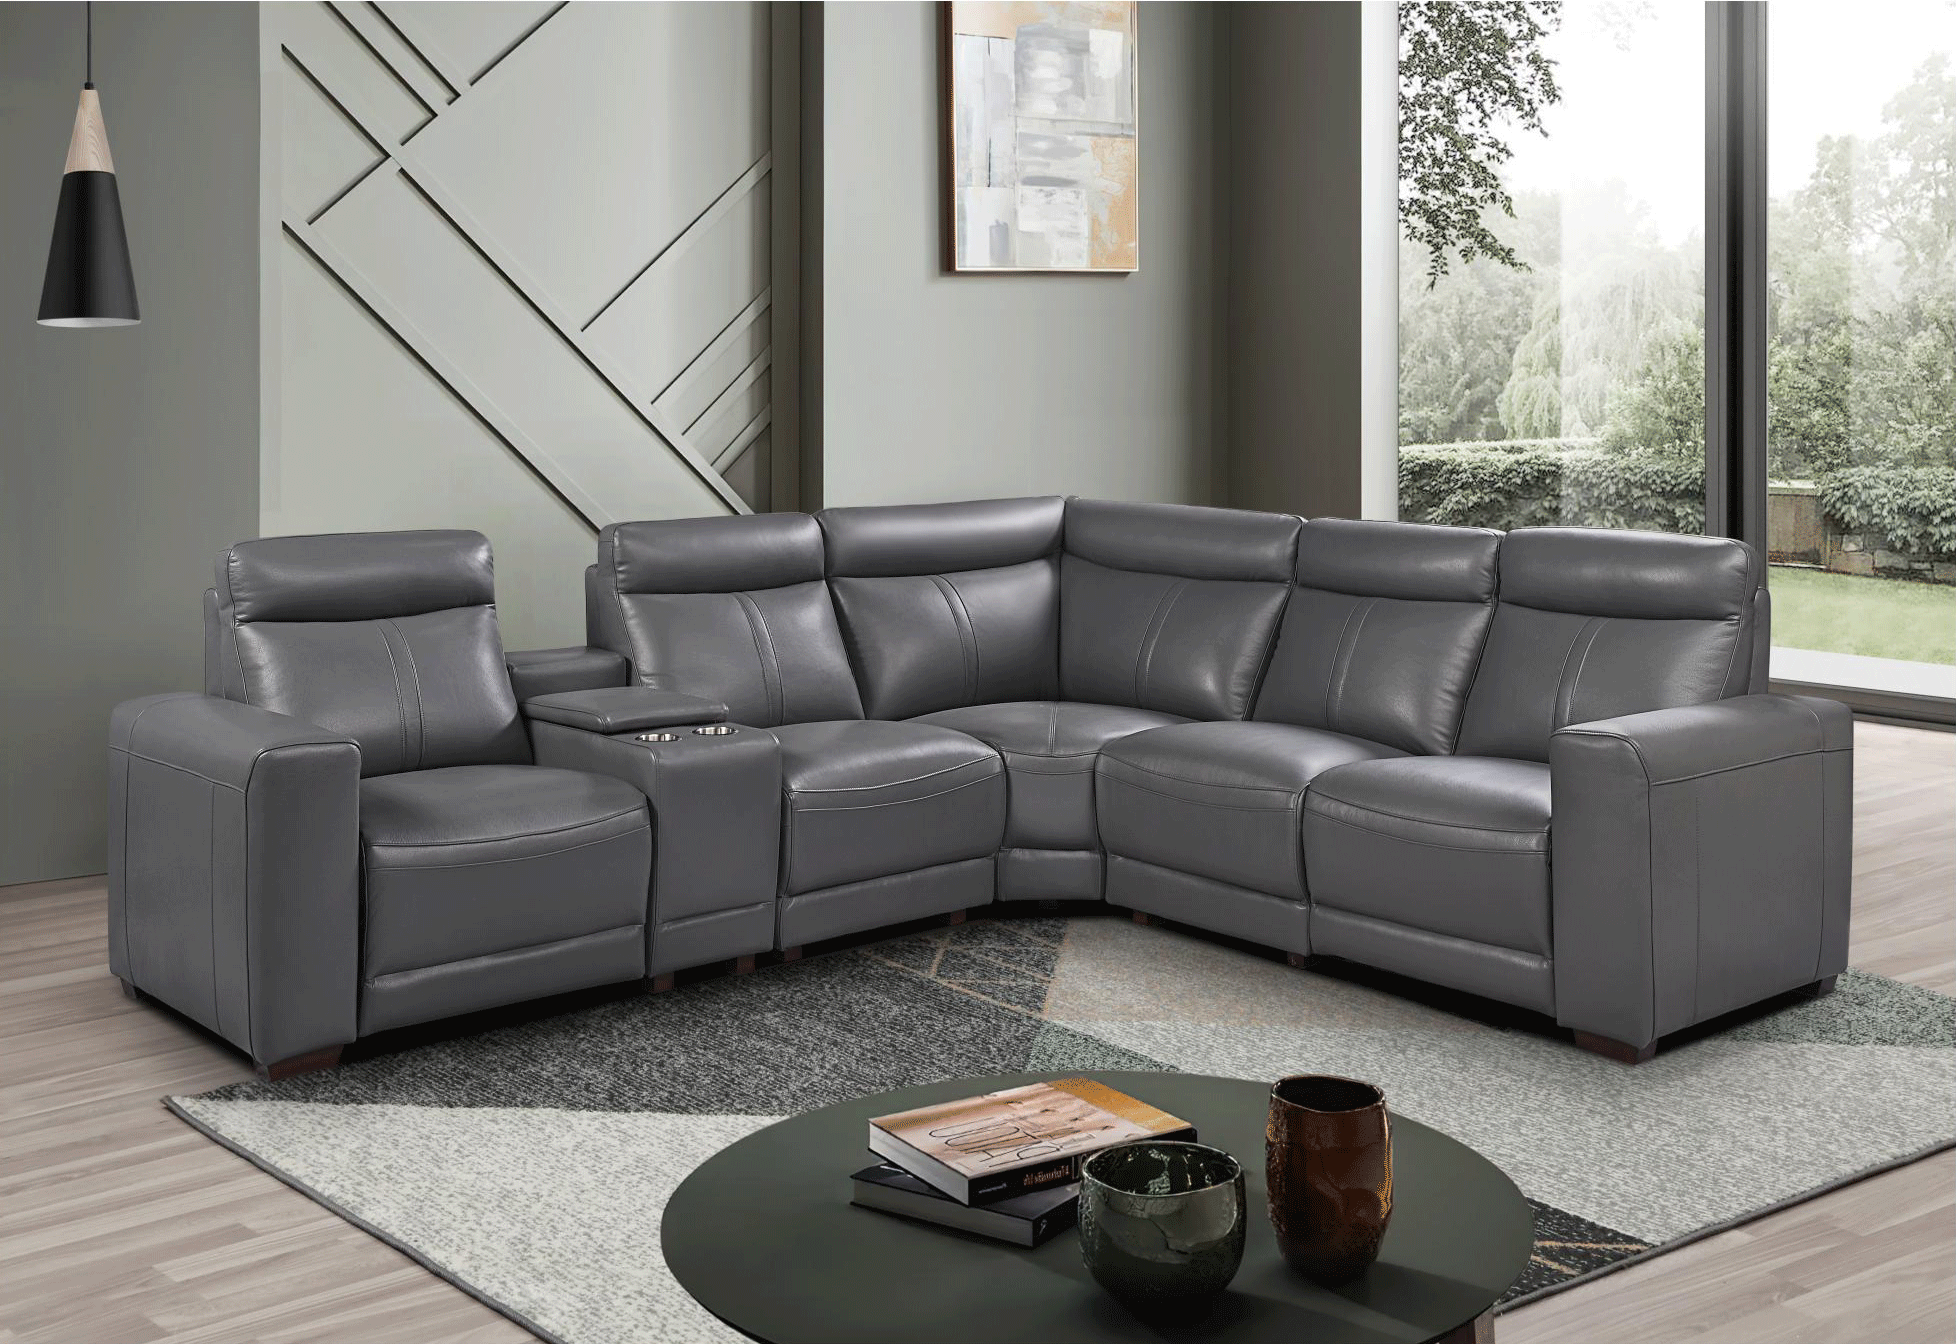 Living Room Furniture Sleepers Sofas Loveseats and Chairs 2777 Sectional w/ recliners